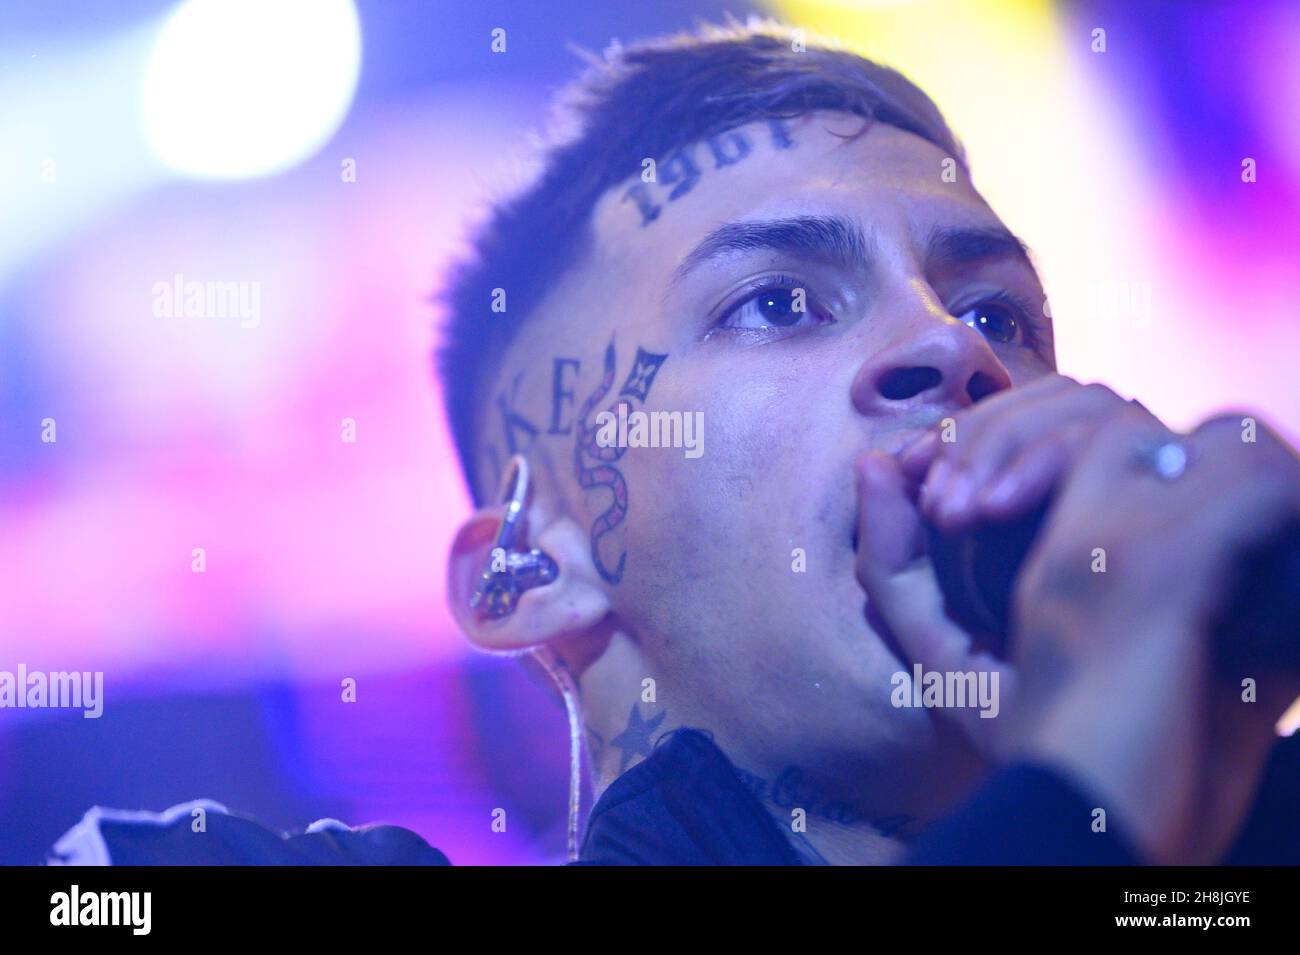 Buenos Aires, Argentina. 29th Nov, 2021. Elian Ángel Valenzuela, commonly known as L-Gante, performs on stage during a music concert at the Luna Park Stadium in Buenos Aires. Credit: SOPA Images Limited/Alamy Live News Stock Photo